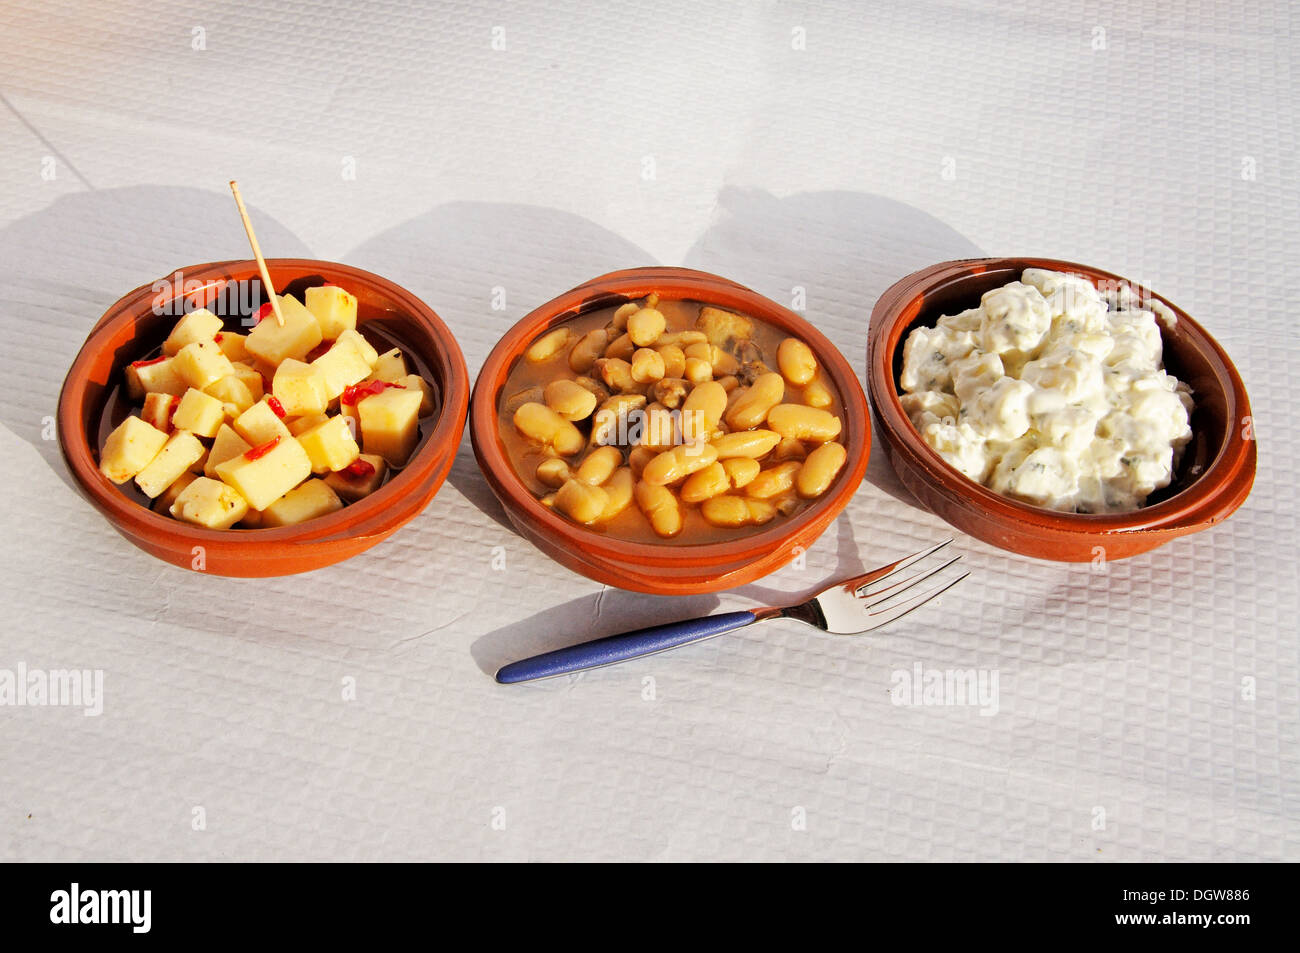 Spanish tapas comprising of Manchego with chill, Beans with pork, and Potato salad, Andalusia, Spain. Stock Photo